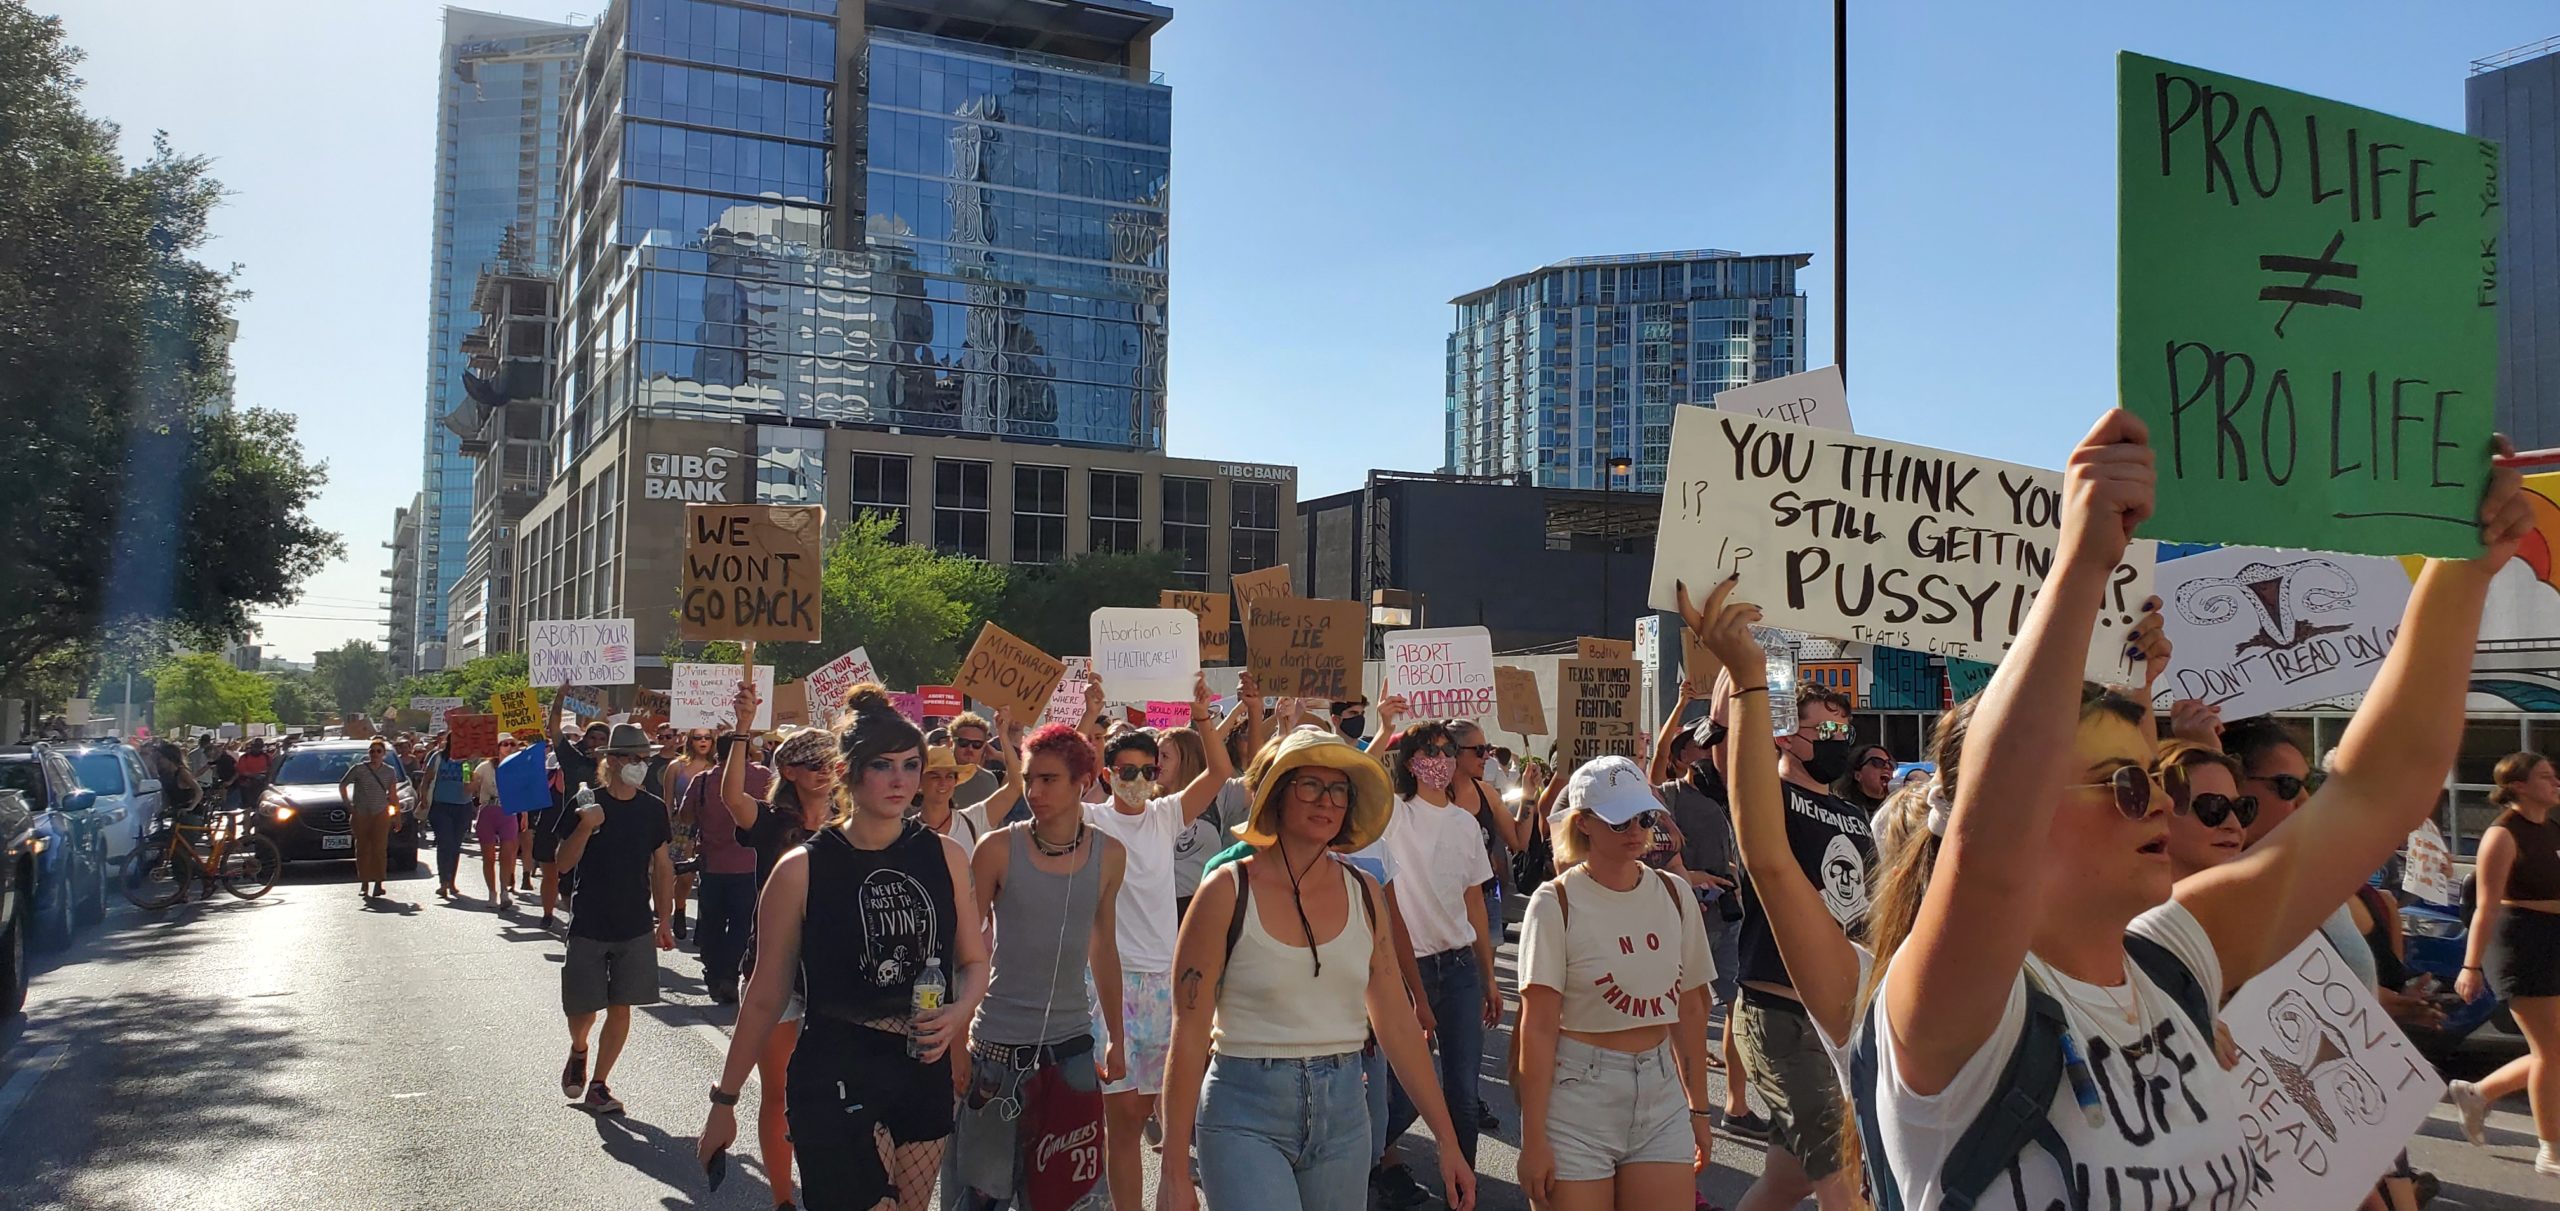 With signs like "Pro-Life does not equal Pro-Life" and "You Think You're Still Getting Pussy, That's Cute" marchers parade through downtown Austin, closely followed by Austin Police.